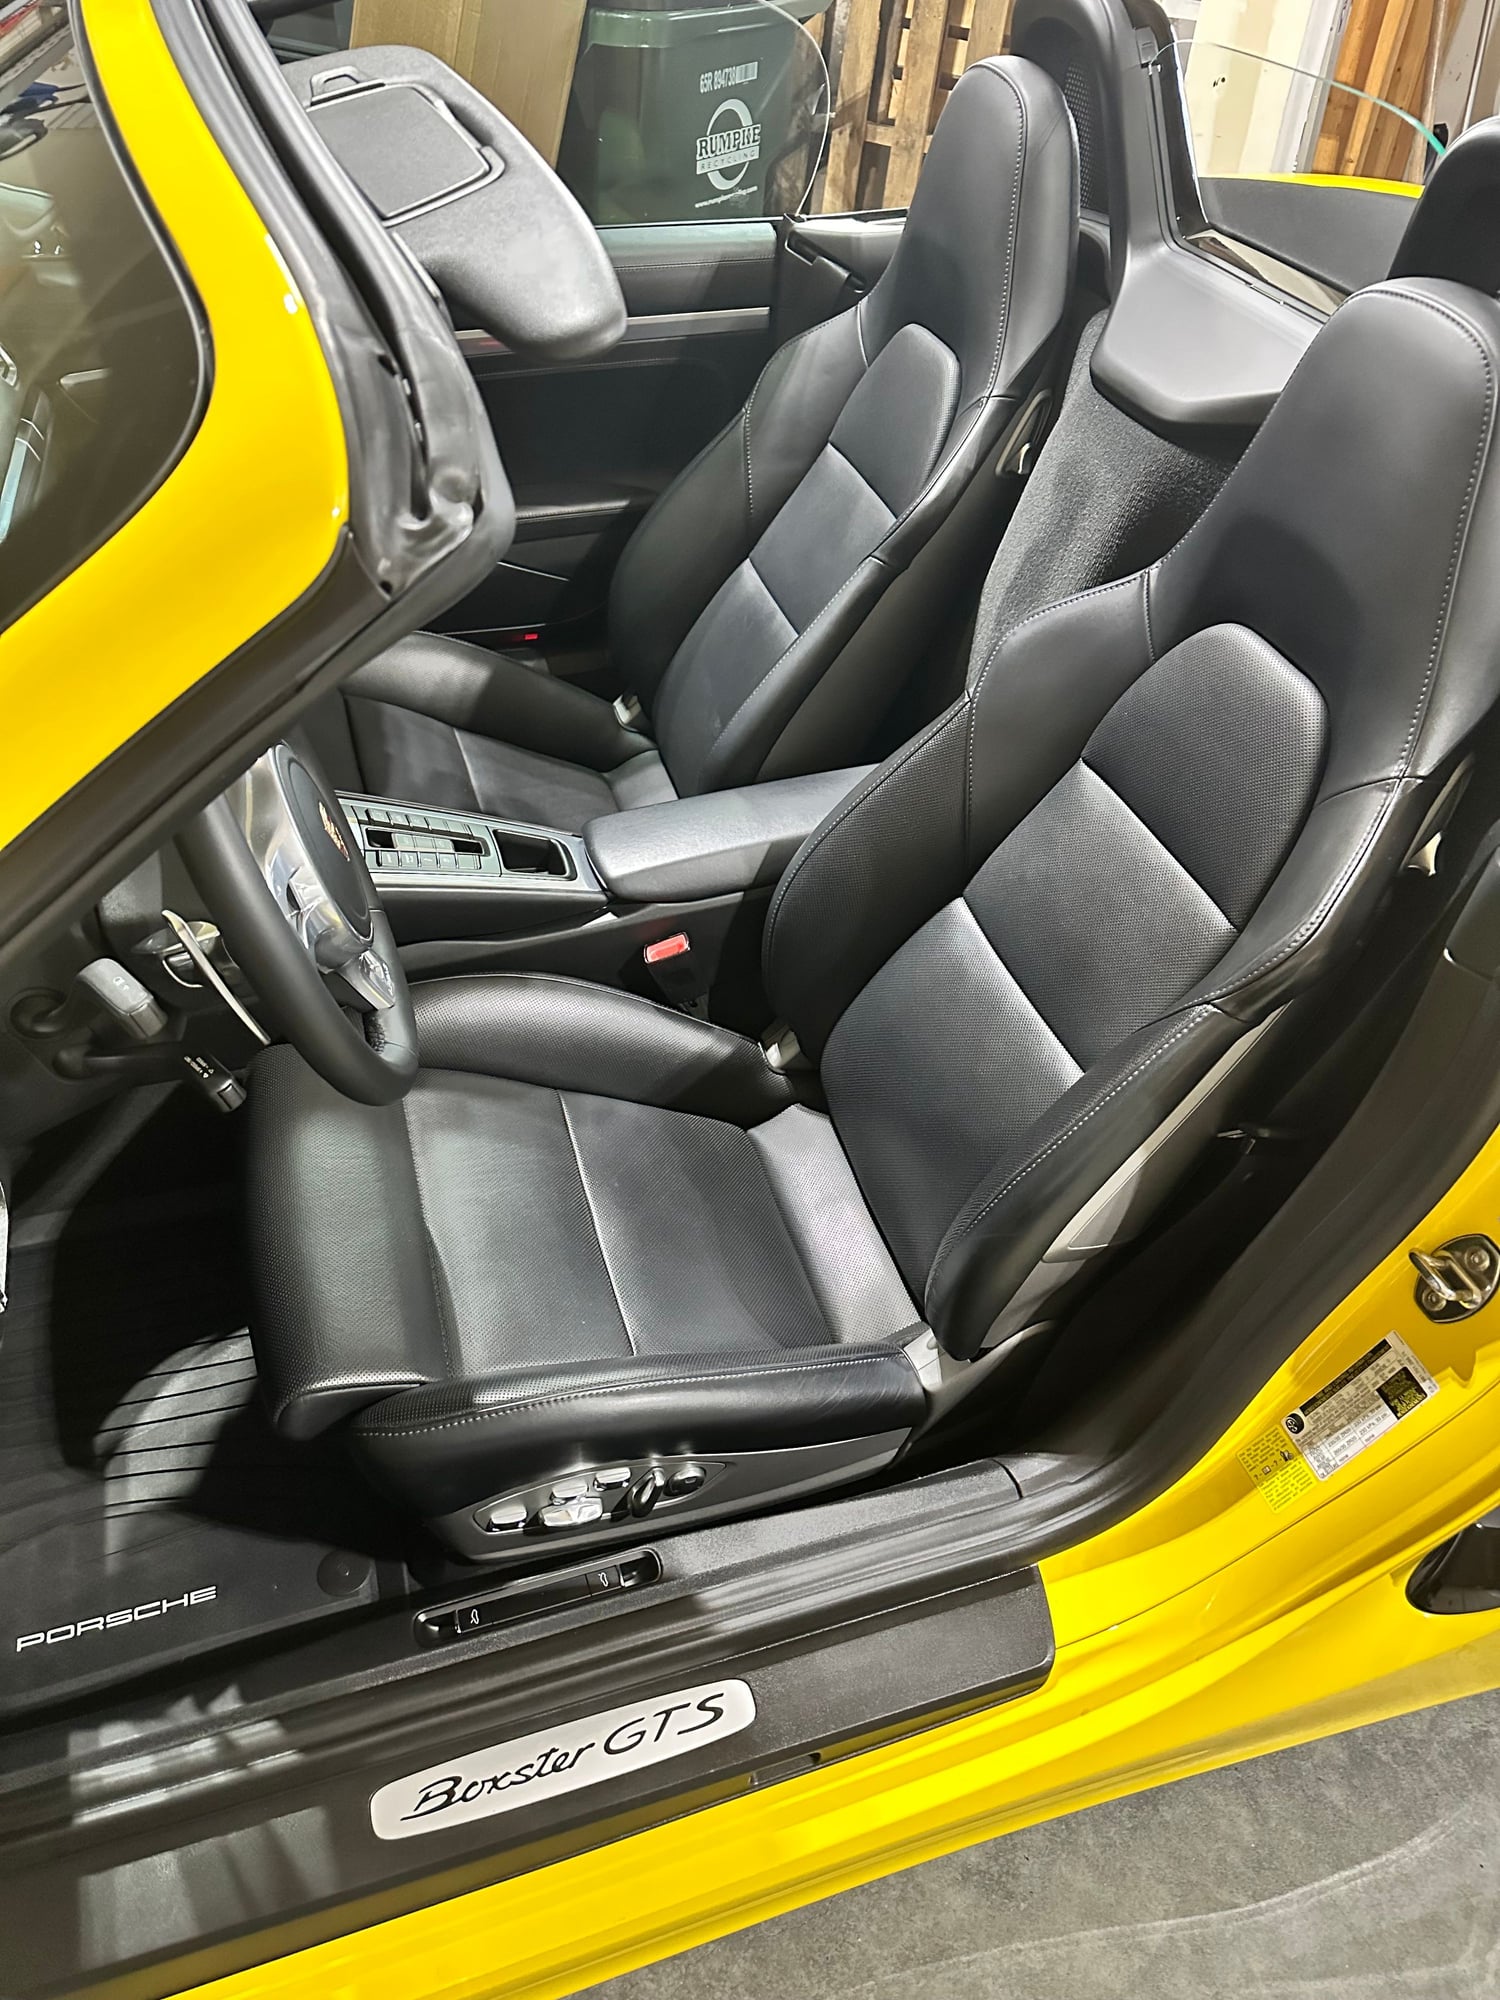 2015 Porsche Boxster - 981 Boxster GTS (2015) For Sale - Used - VIN WP0CB2A81FS140465 - 34,638 Miles - 6 cyl - 2WD - Automatic - Convertible - Yellow - Cincinnati, OH 45065, United States